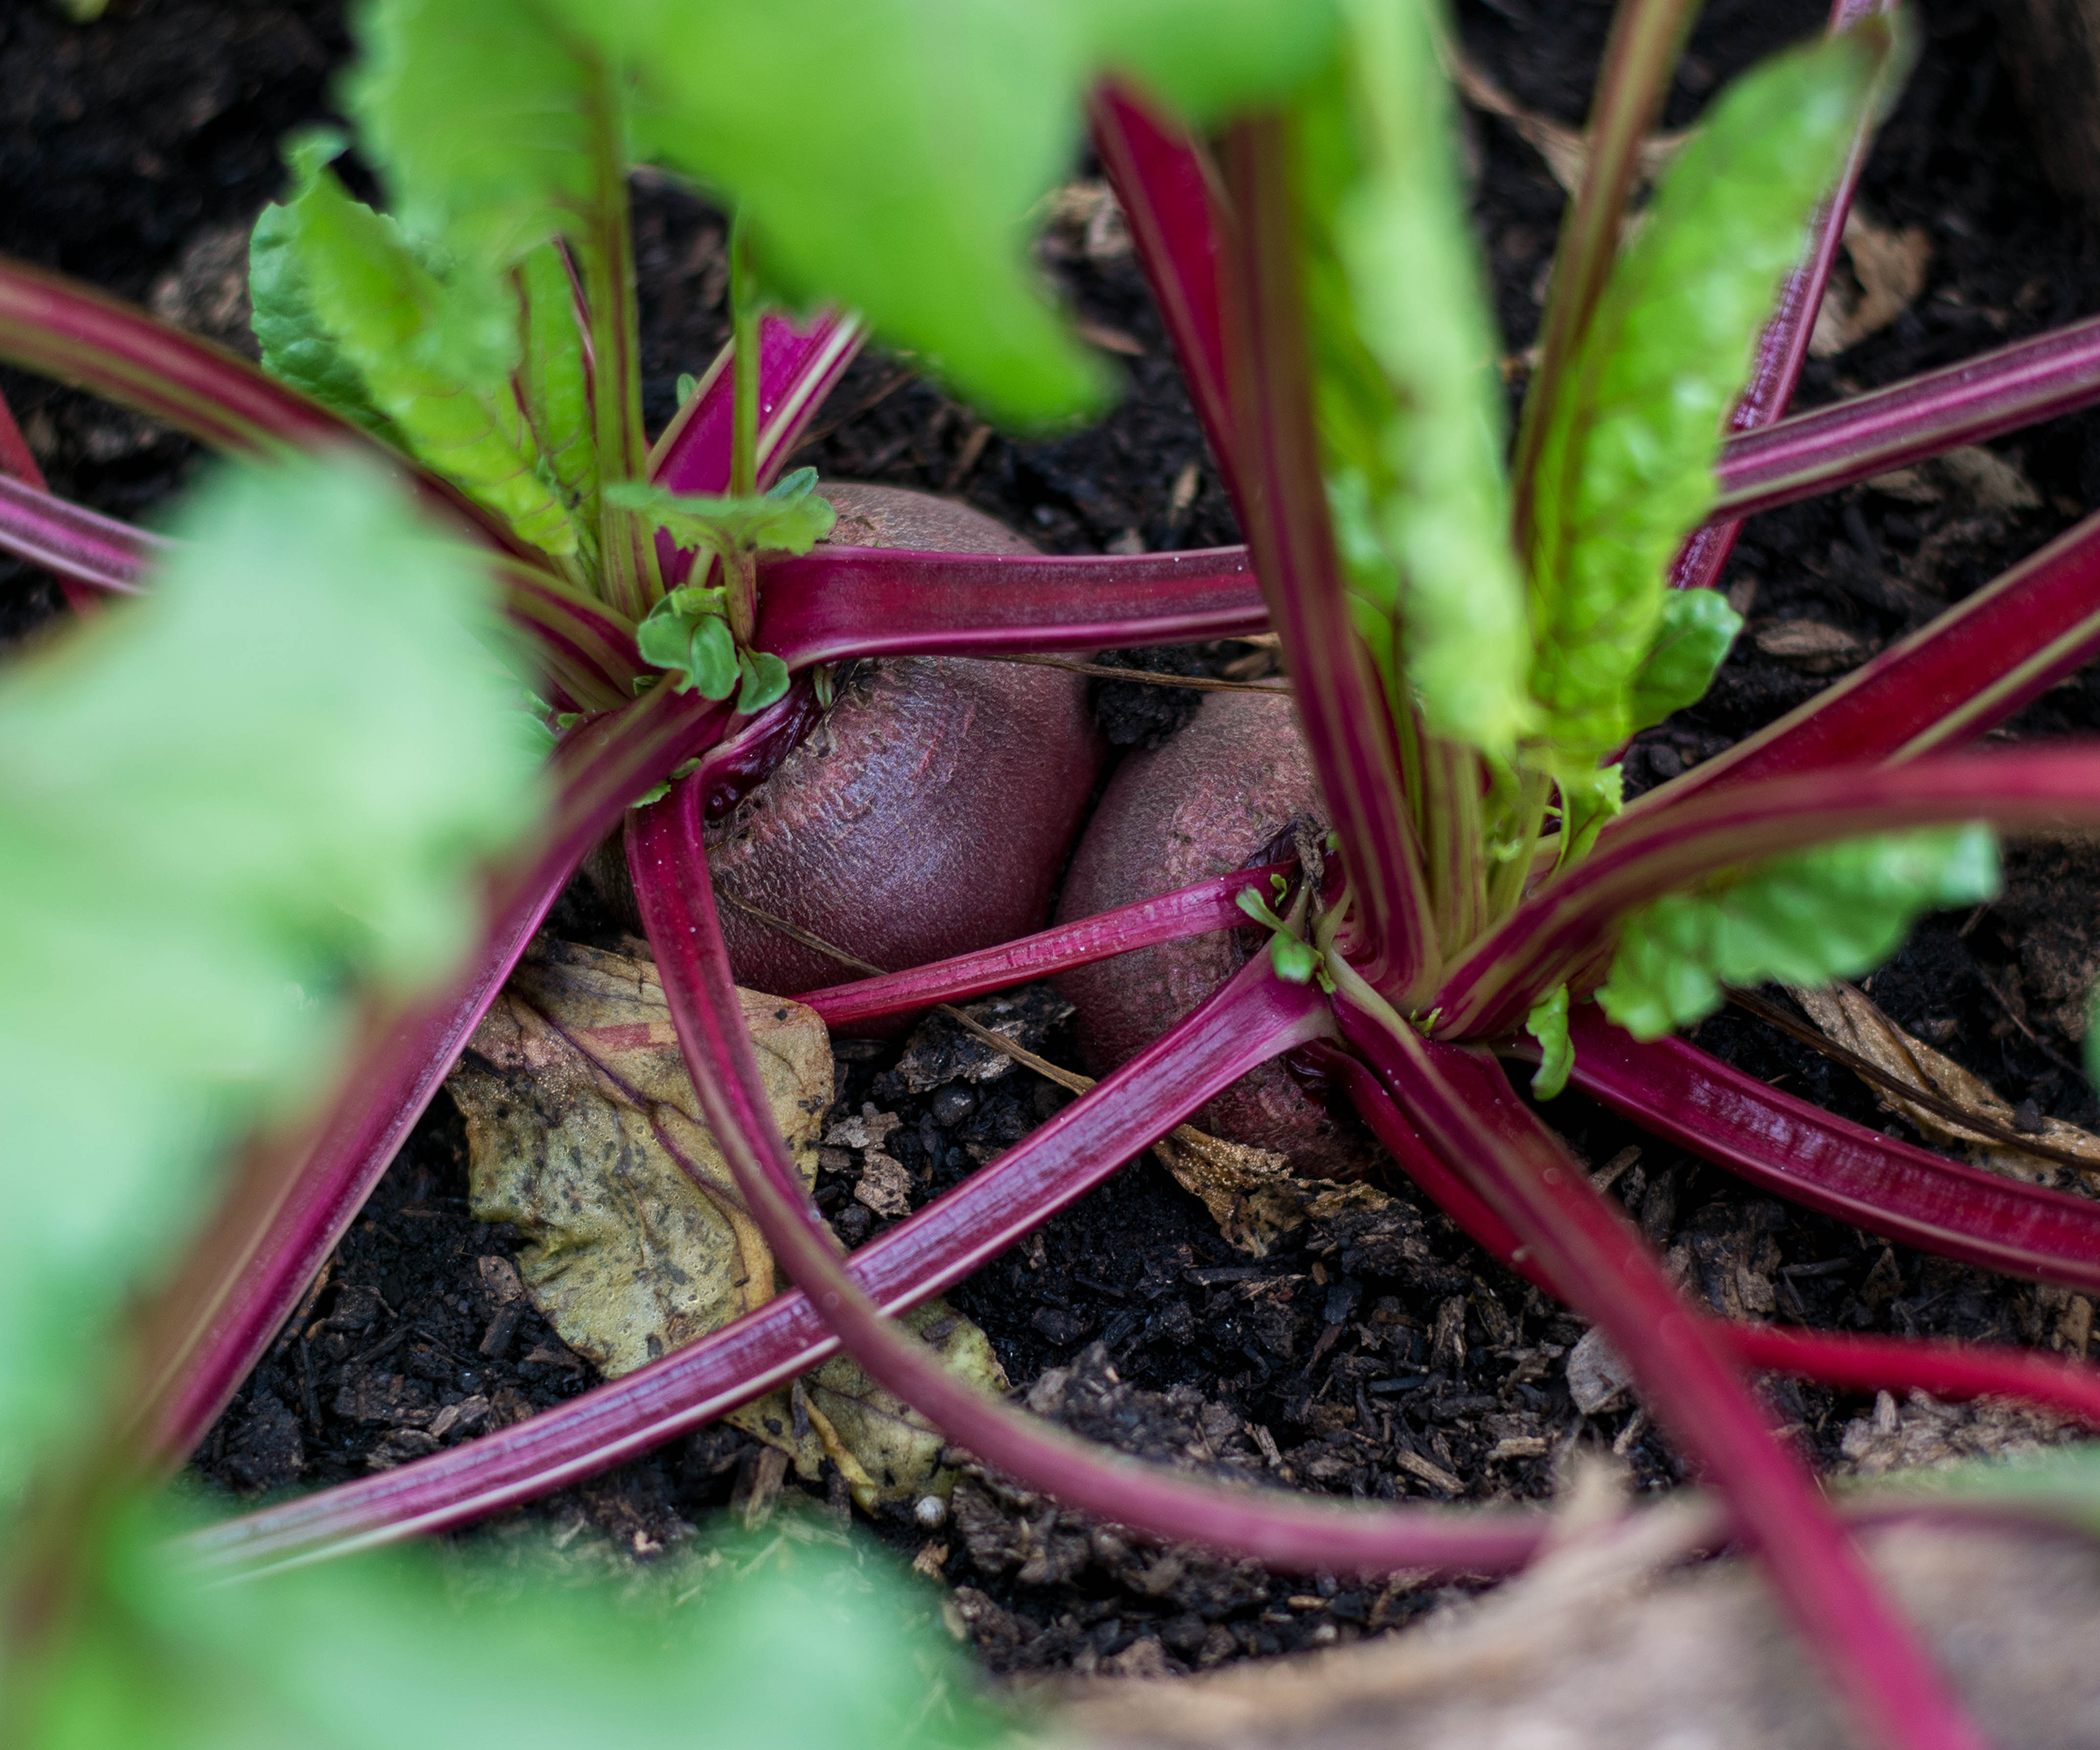 Beetroots growing in the vegetable plot